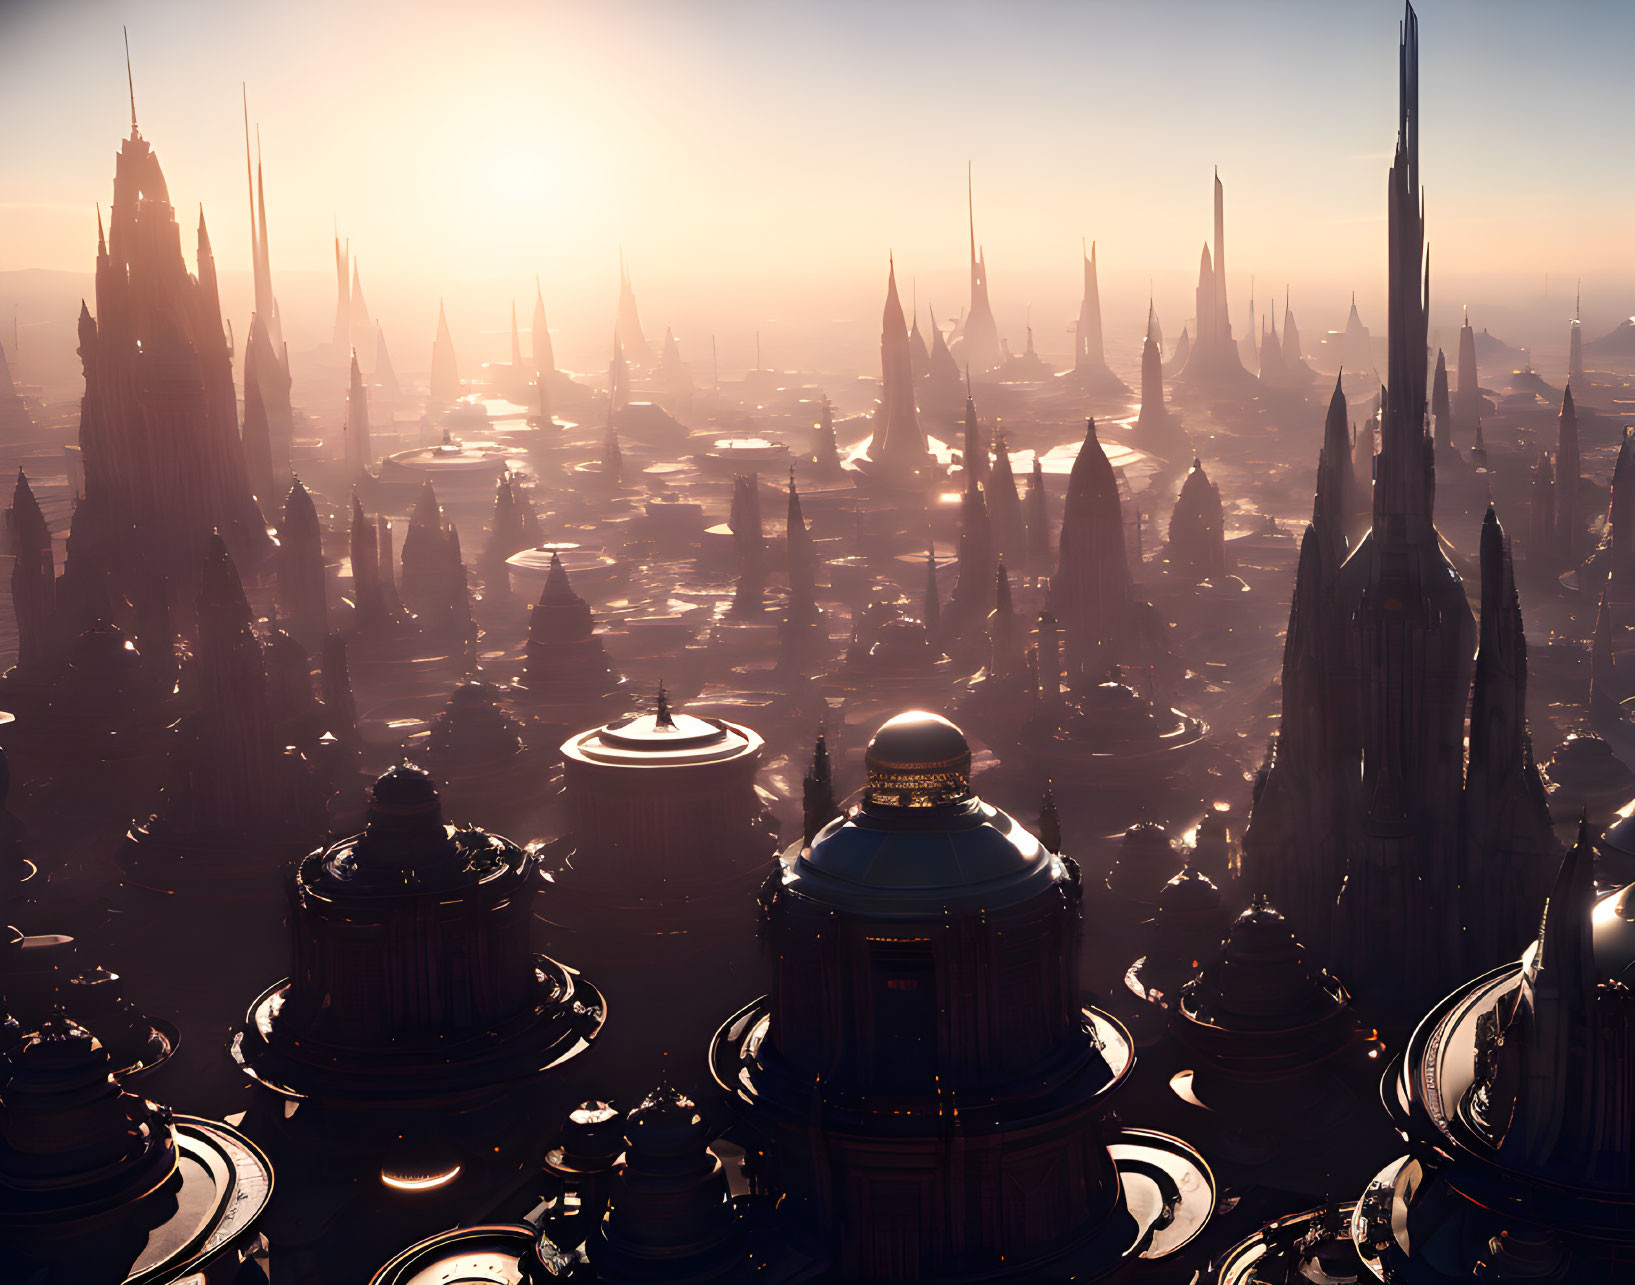 Futuristic cityscape with towering spires at sunrise or sunset